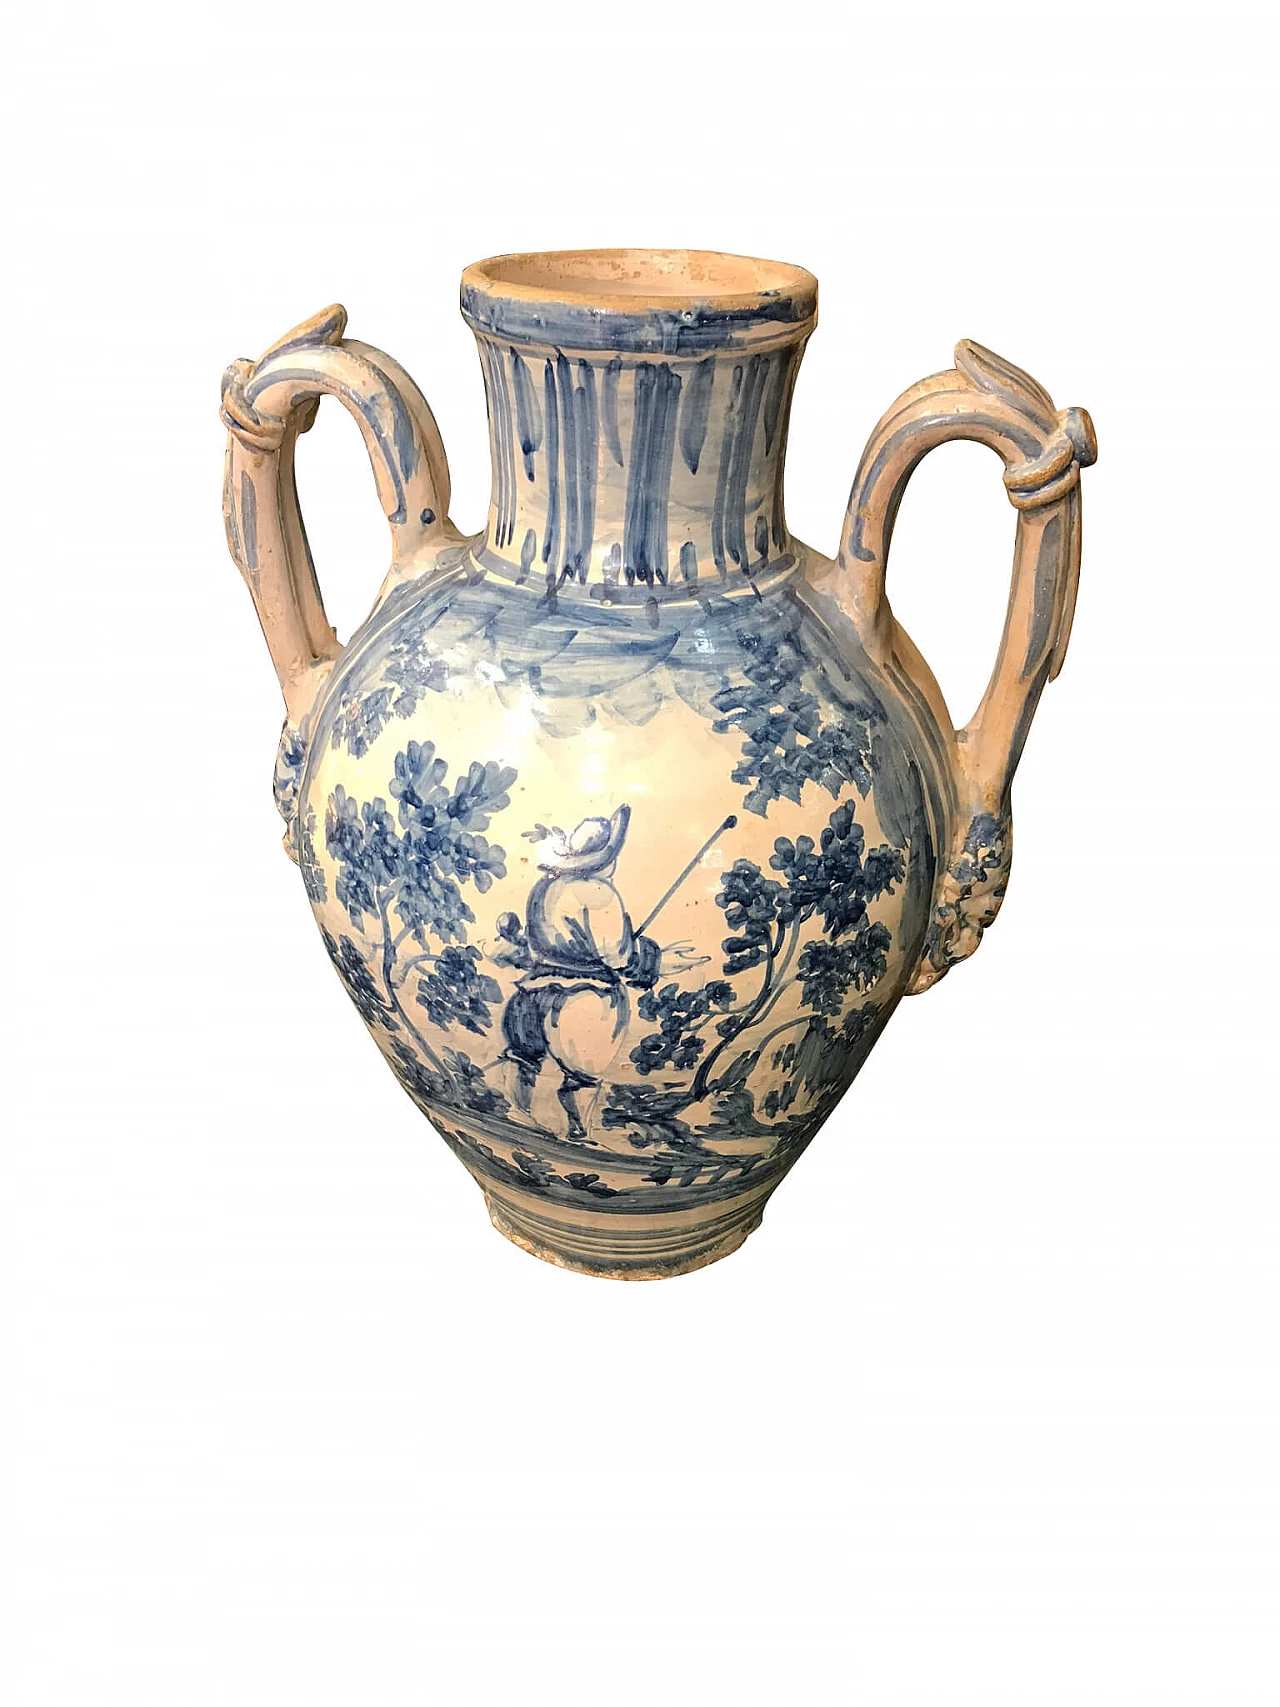 Neapolitan Vase  by Andrea Vaccari in blue painted majolica, 18th century 1074602